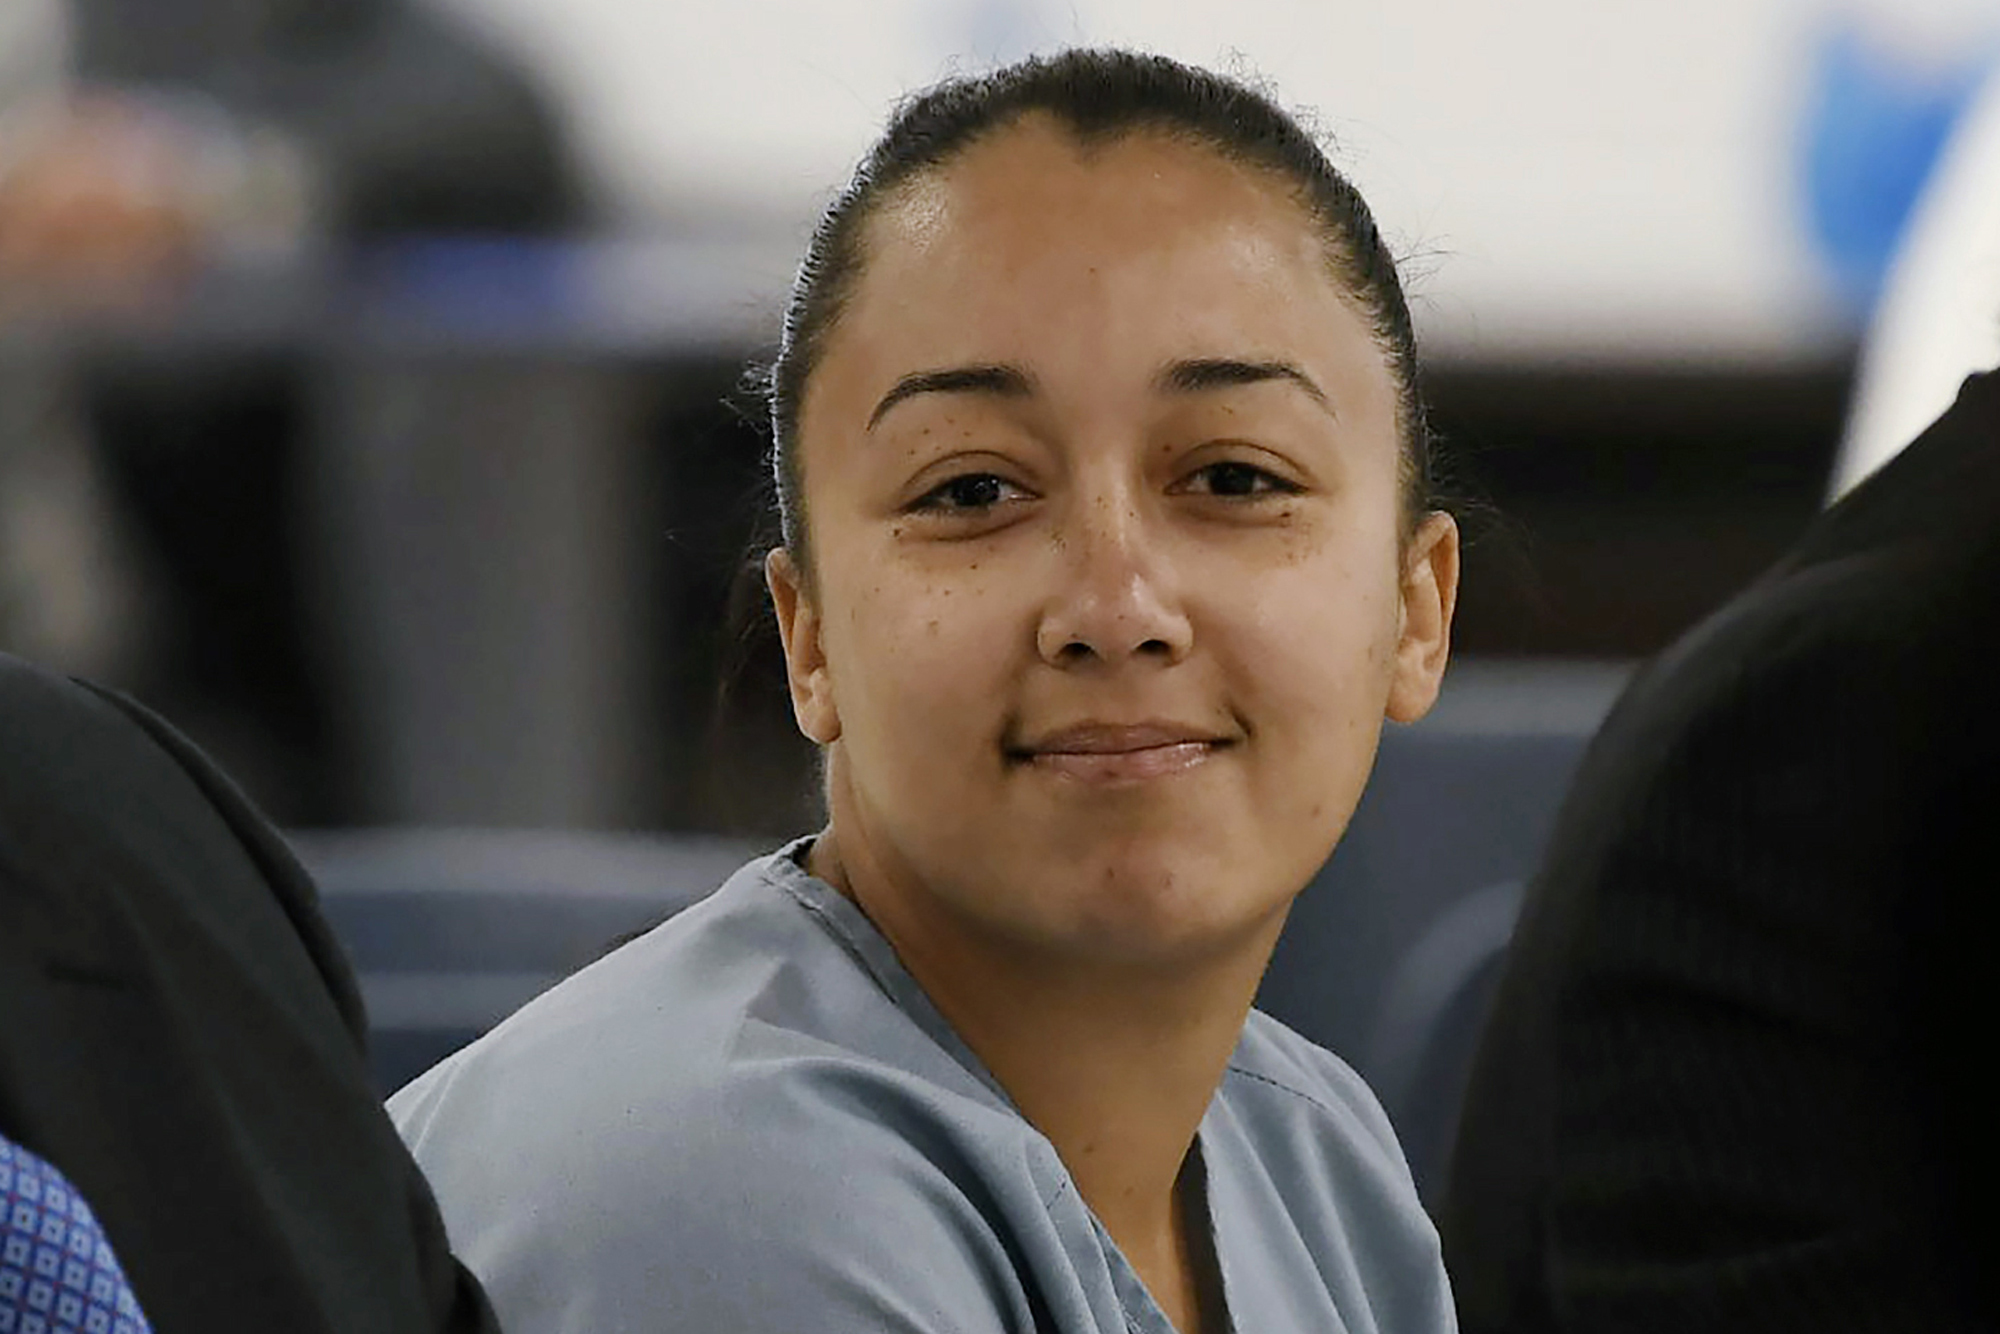 Sex Trafficking Victim Cyntoia Brown Who Received Life Sentence For Murder Released From